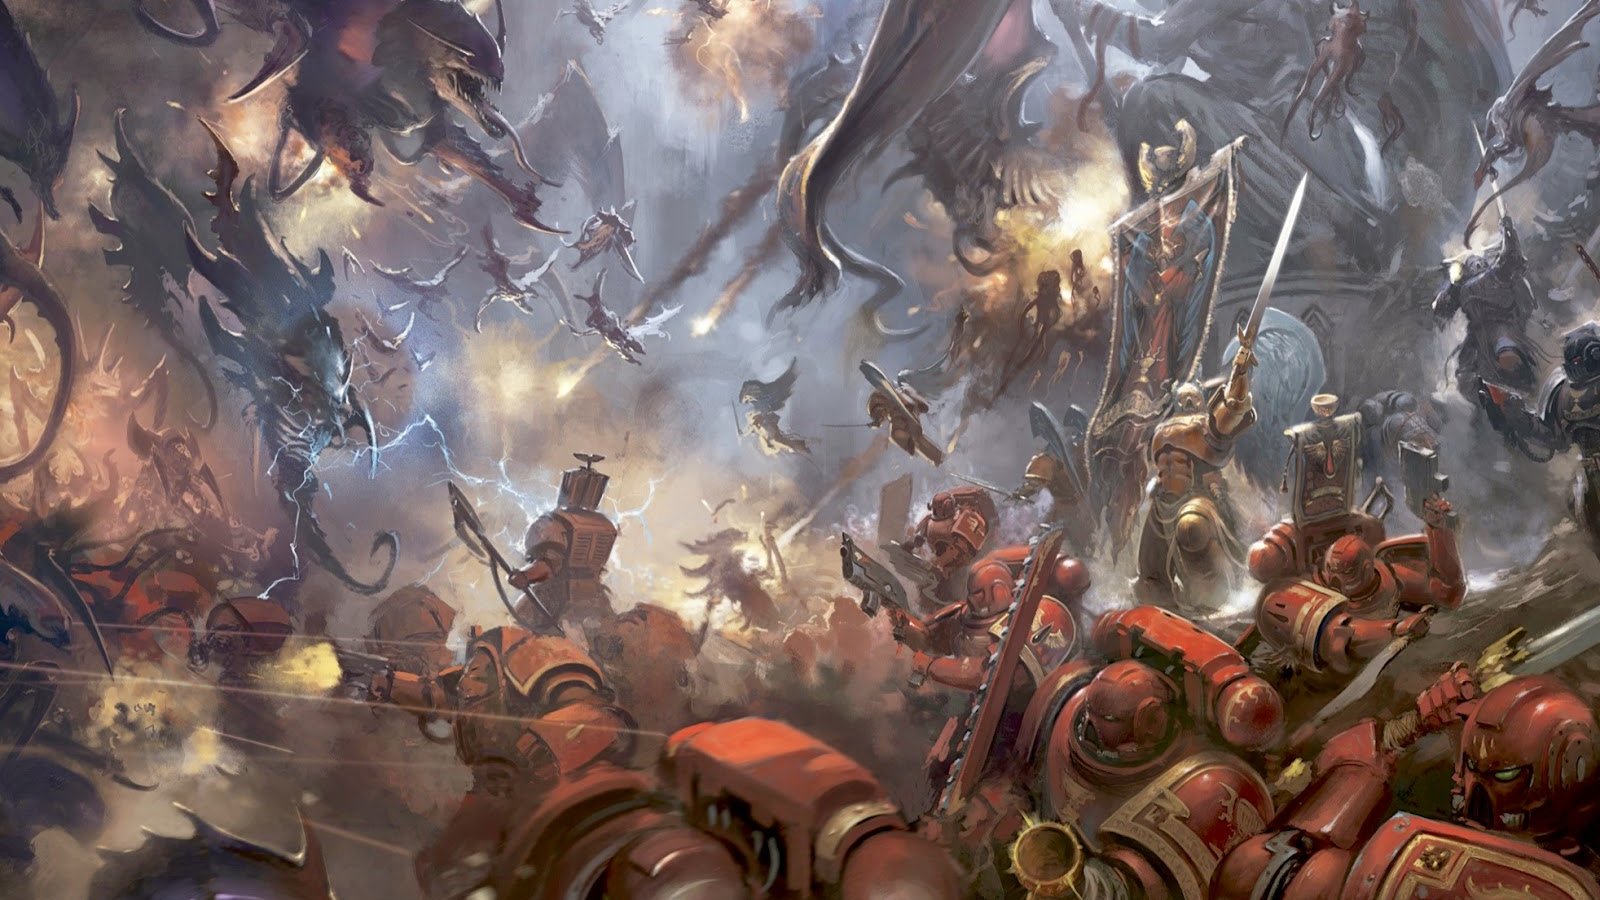 Free download DED ARD Blood Angels and all things Warhammer 40K Blood Angels [1600x1173] for your Desktop, Mobile & Tablet. Explore Warhammer 40K Blood Angels Wallpaper. Warhammer 40K Blood